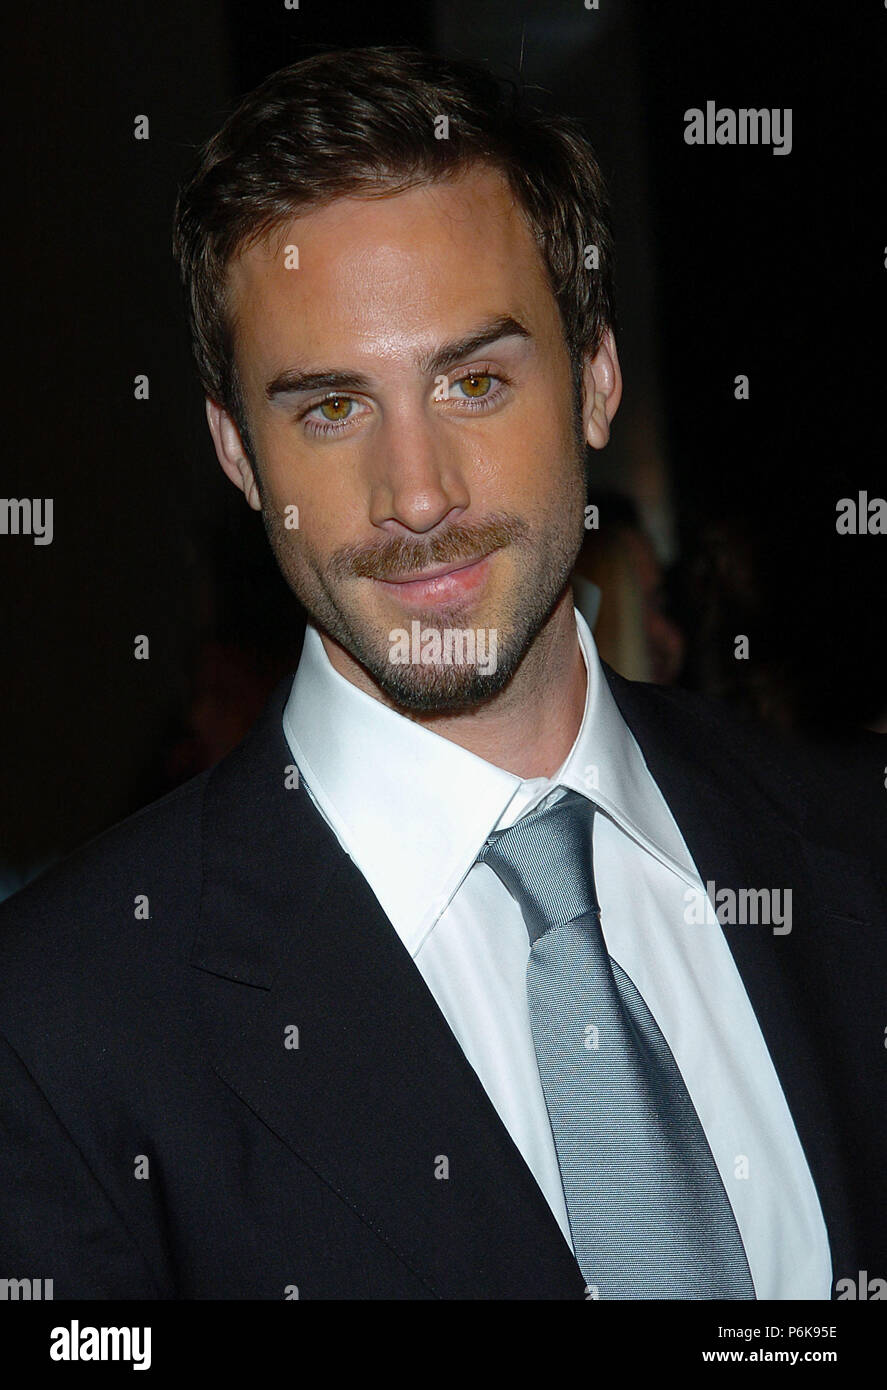 Joseph Fiennes arriving at The Merchand Of Venice at The AFI Film Festival at the Arclight Theatre in Los Angeles. November 9, 2004.FiennesJoseph030 Red Carpet Event, Vertical, USA, Film Industry, Celebrities,  Photography, Bestof, Arts Culture and Entertainment, Topix Celebrities fashion /  Vertical, Best of, Event in Hollywood Life - California,  Red Carpet and backstage, USA, Film Industry, Celebrities,  movie celebrities, TV celebrities, Music celebrities, Photography, Bestof, Arts Culture and Entertainment,  Topix, headshot, vertical, one person,, from the year , 2004, inquiry tsuni@Gamma Stock Photo